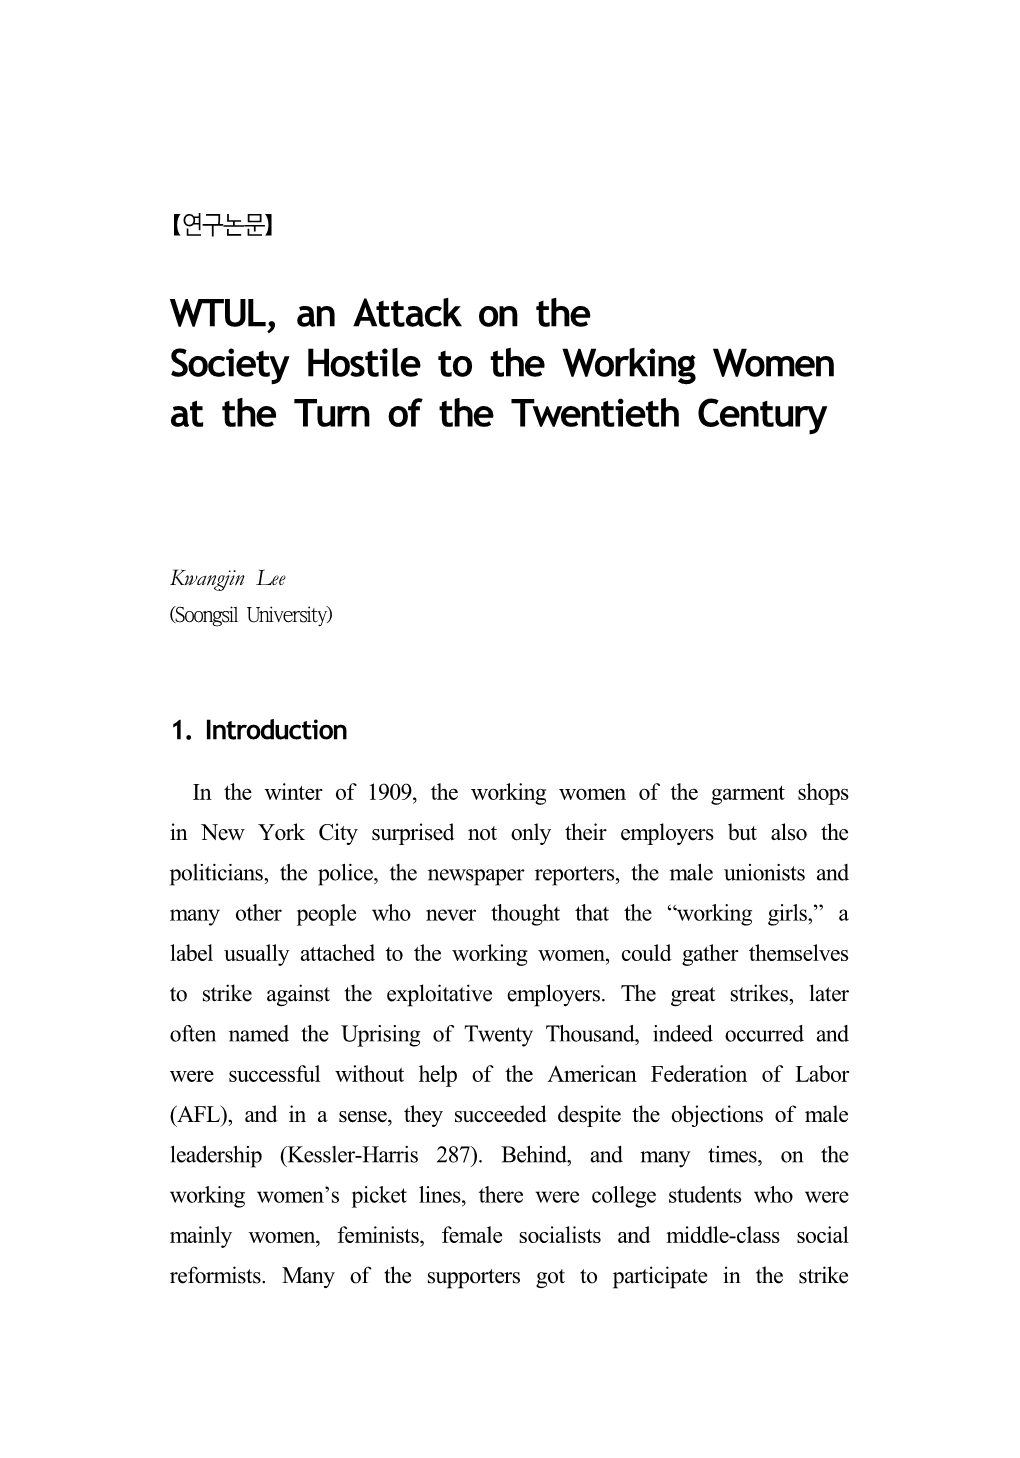 WTUL, an Attack on the Society Hostile to the Working Women at the Turn of the Twentieth Century